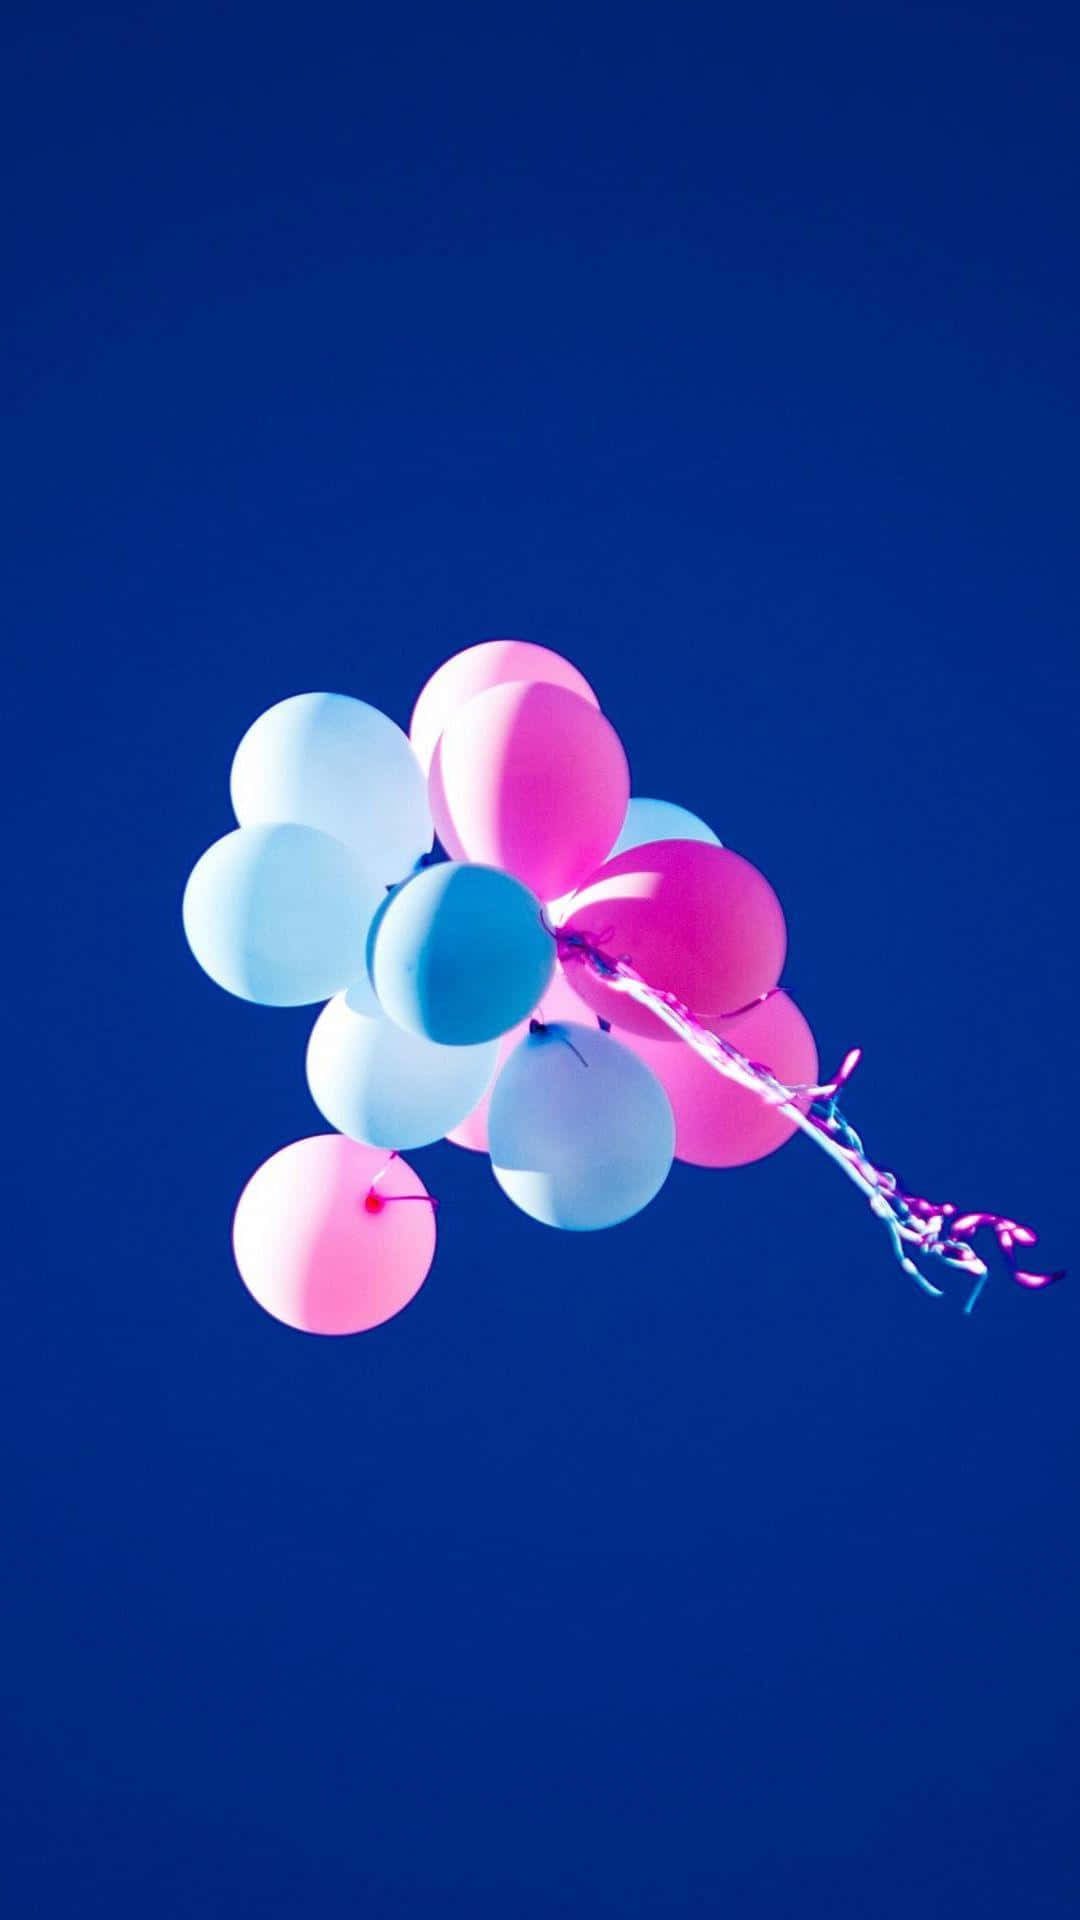 Image  “A Colorful Array of Balloons Taking Flight”